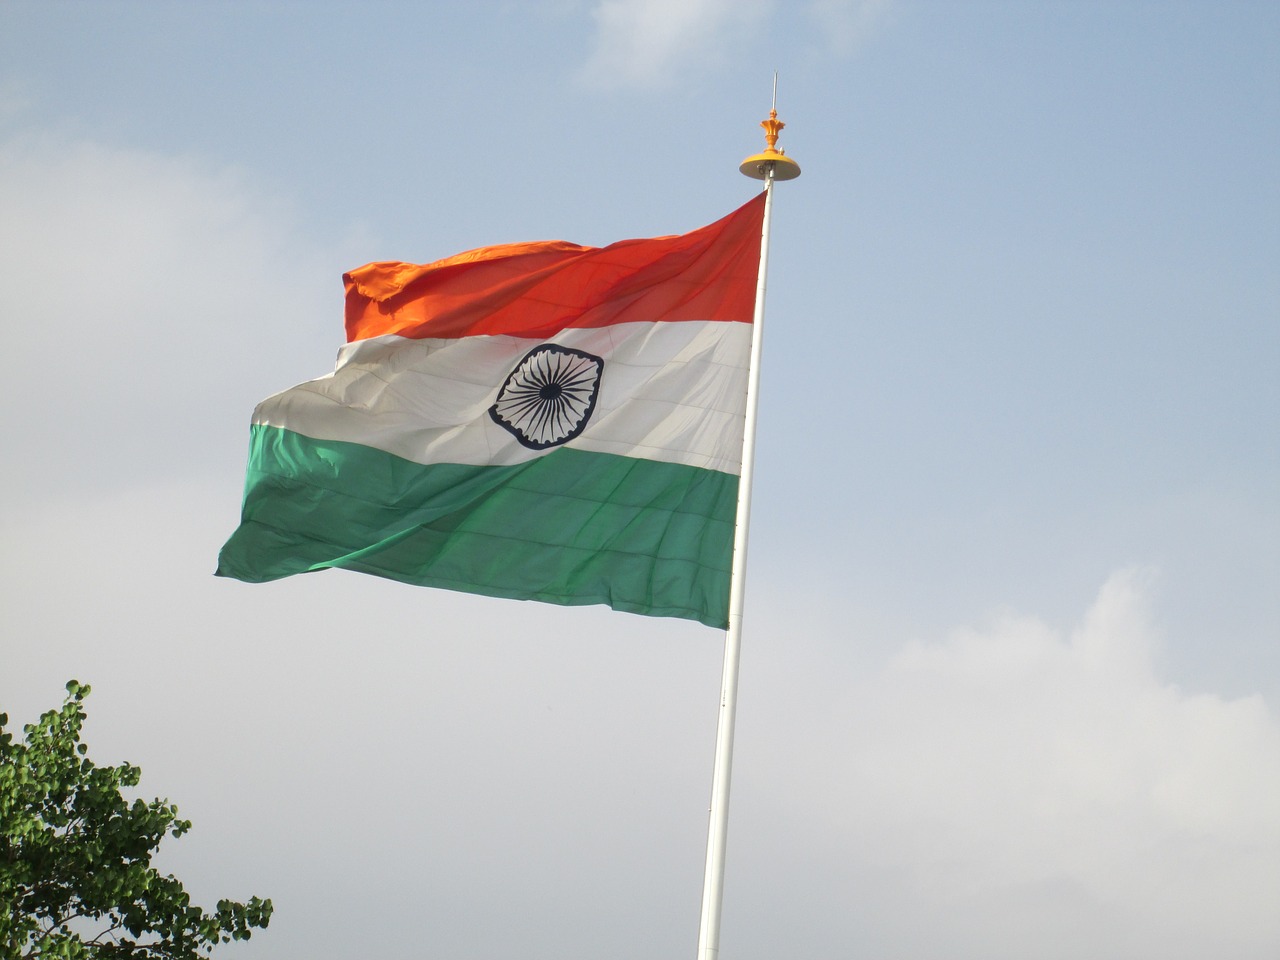 india flag country free photo